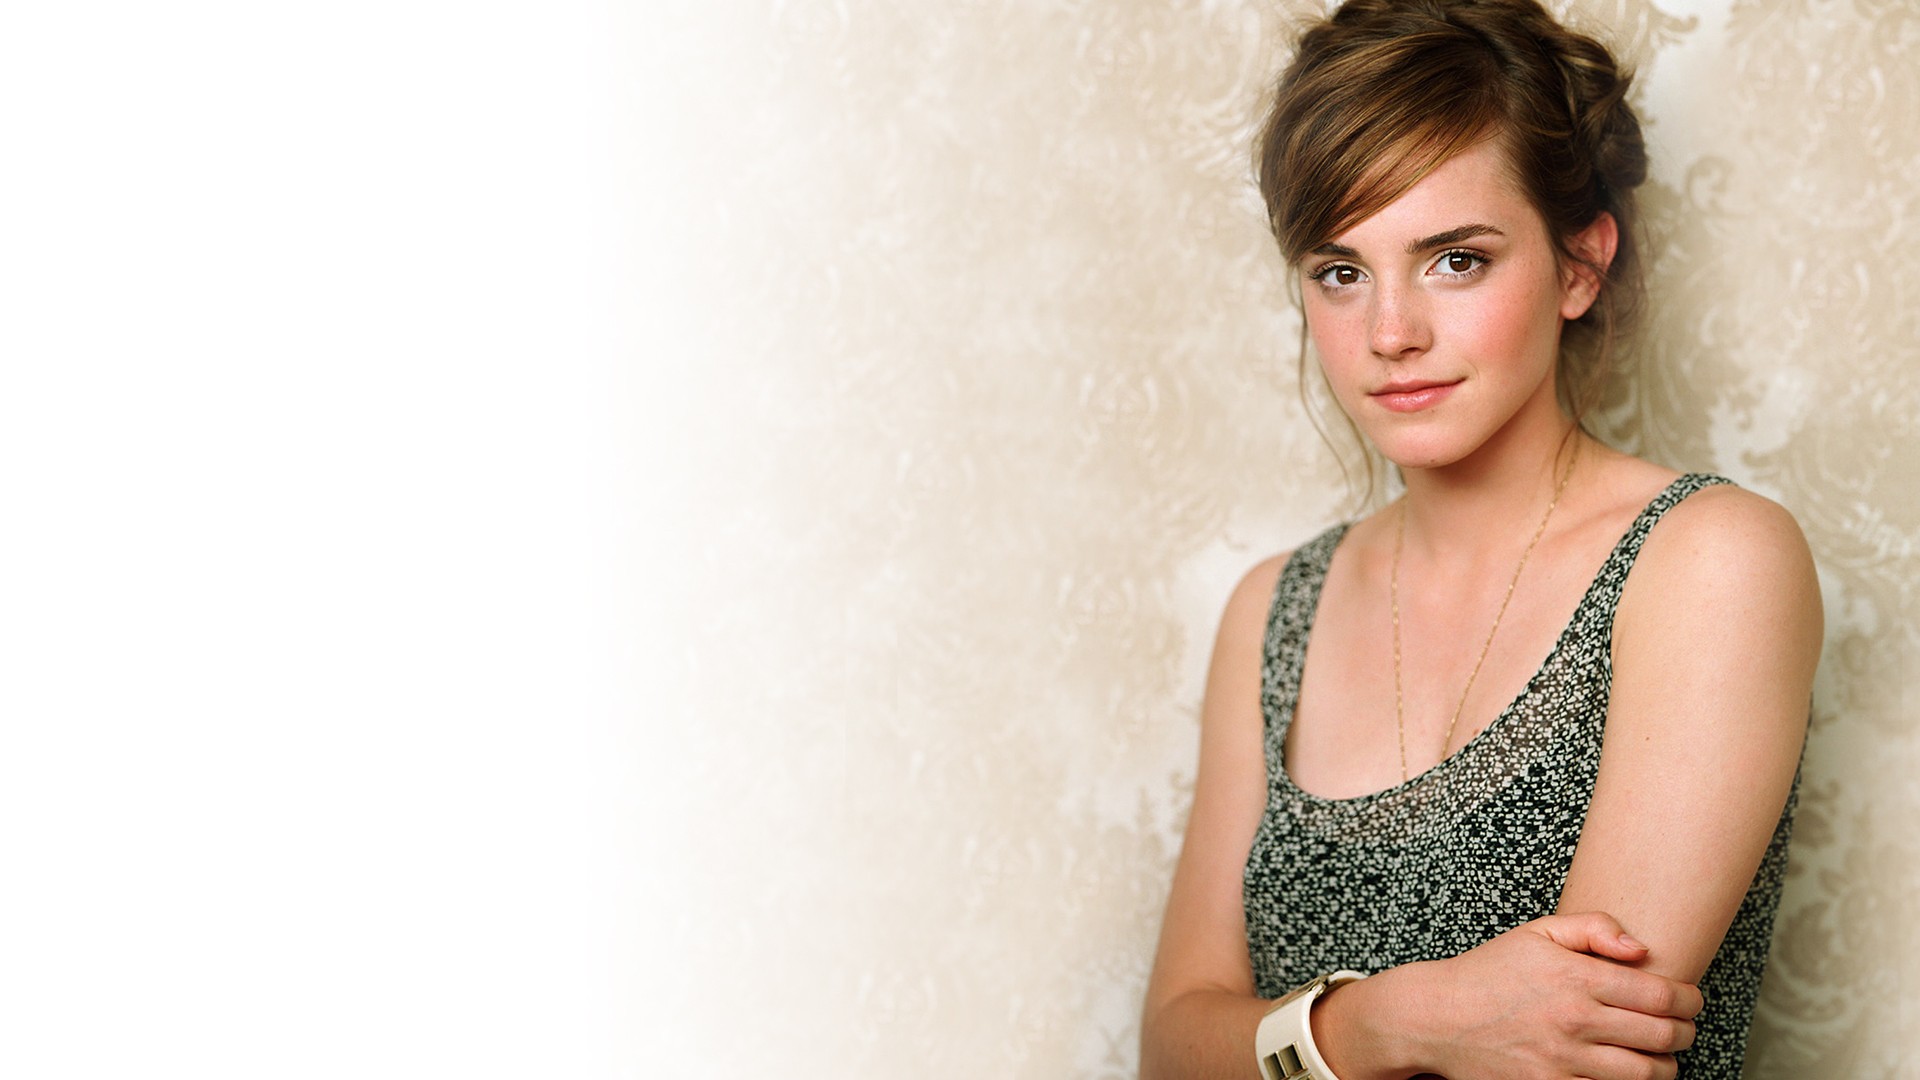 Emma Watson Actress Brunette Women Smiling Arms Crossed Portrait Looking At Viewer Freckles Gray Dre 1920x1080